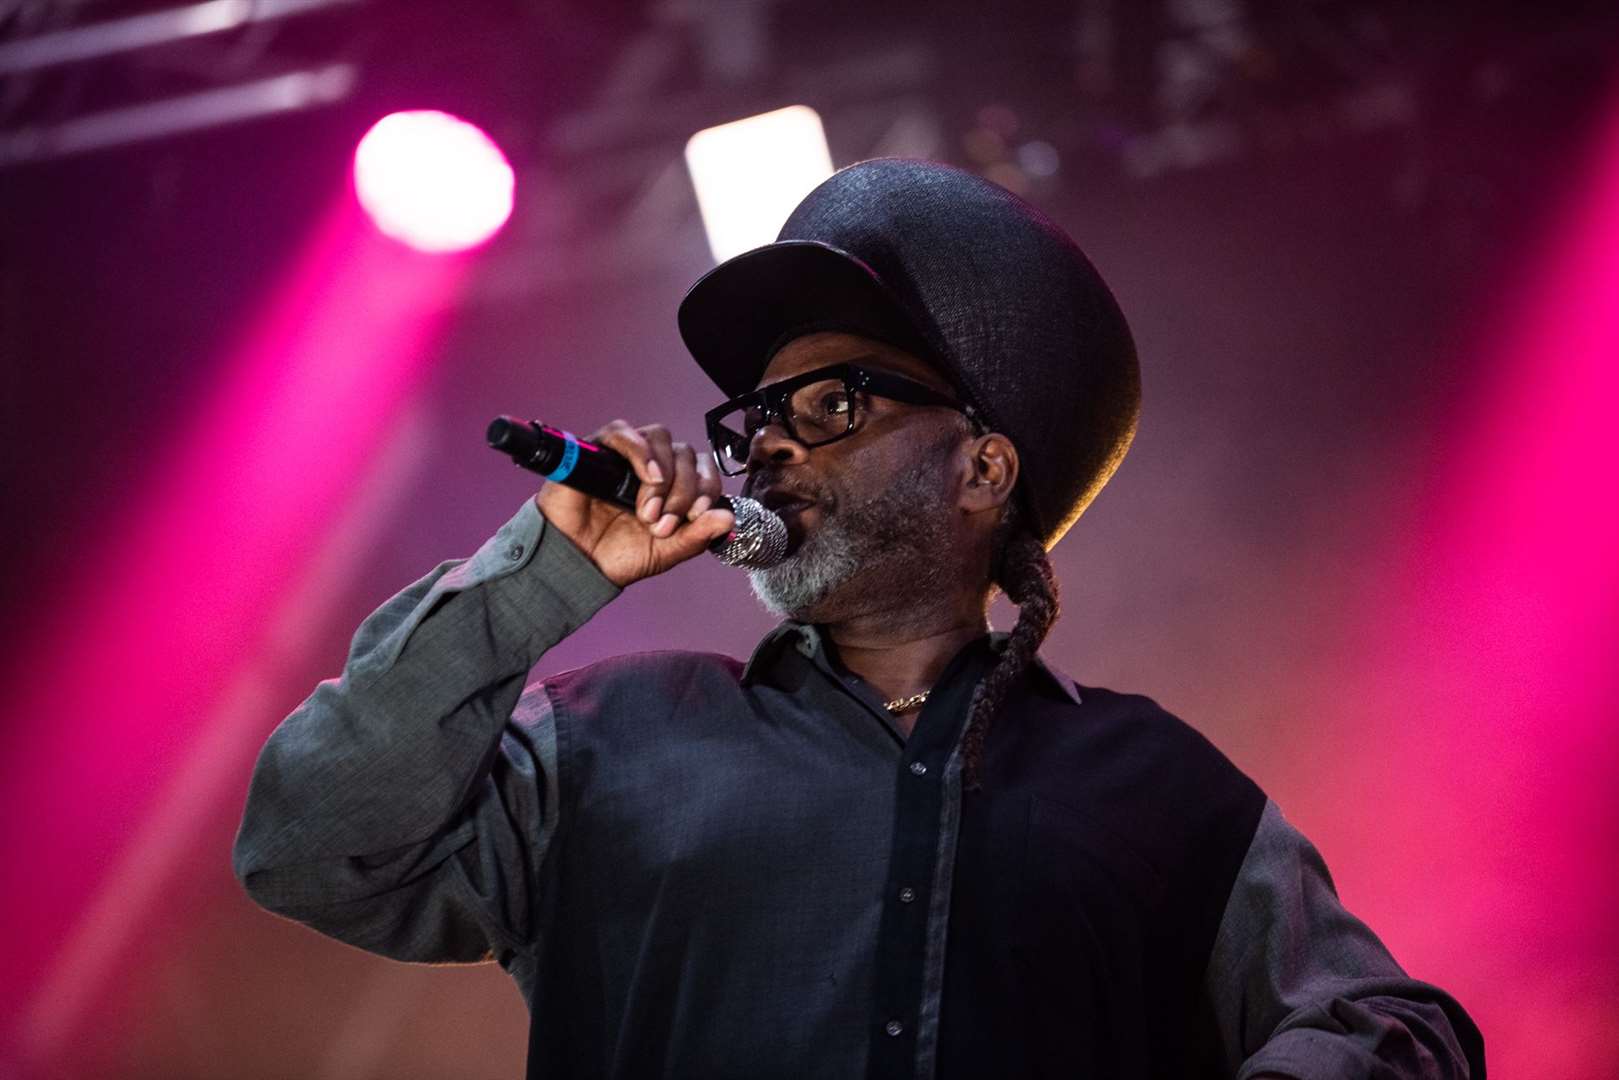 Soul II Soul at the Rochester Castle Concerts sold out